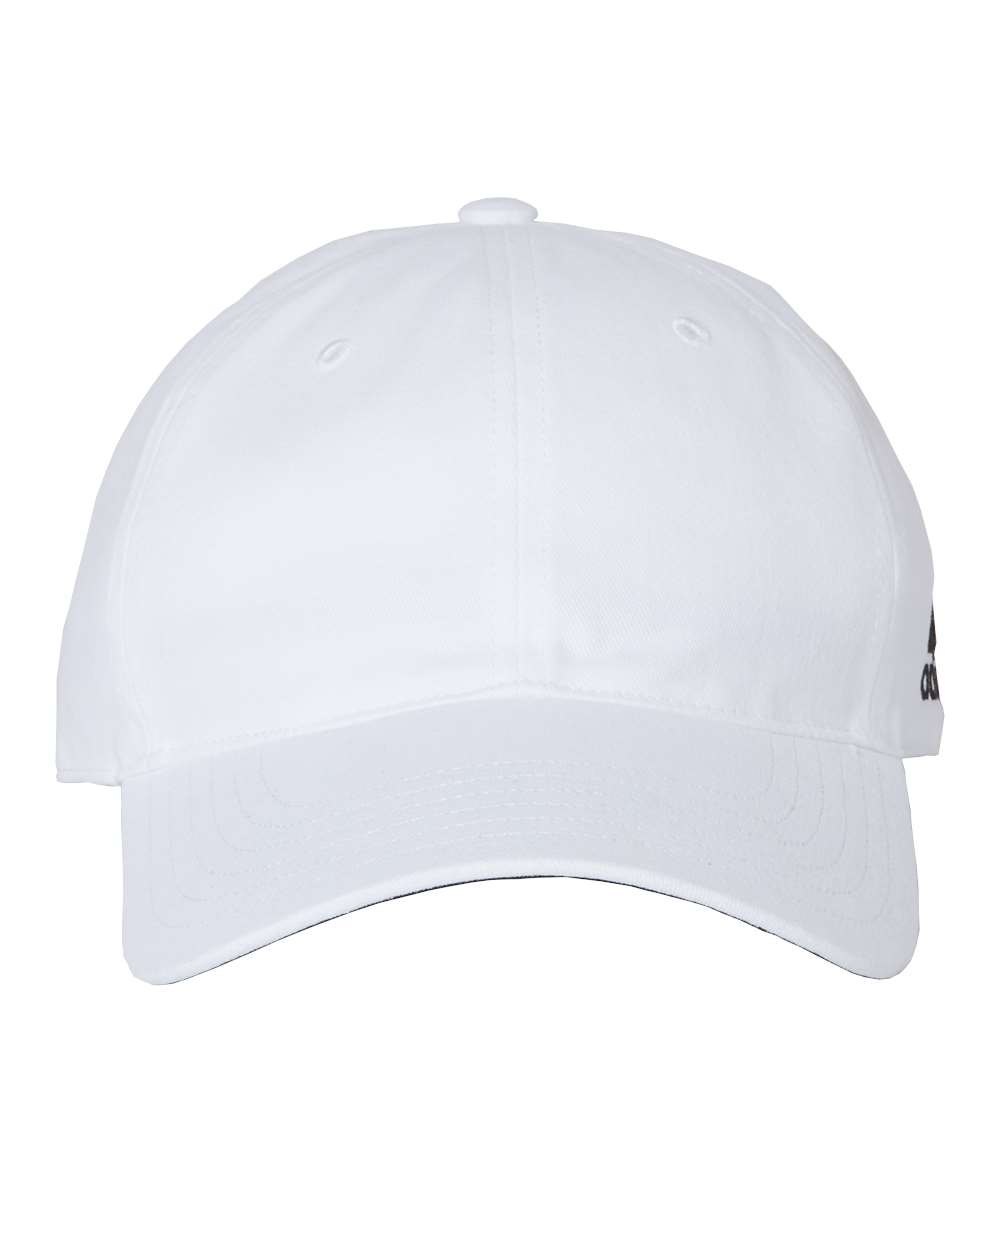 Persoonlijk Realistisch lezing Core Performance Relaxed Cap - Adidas A12 | Clothing Shop Online